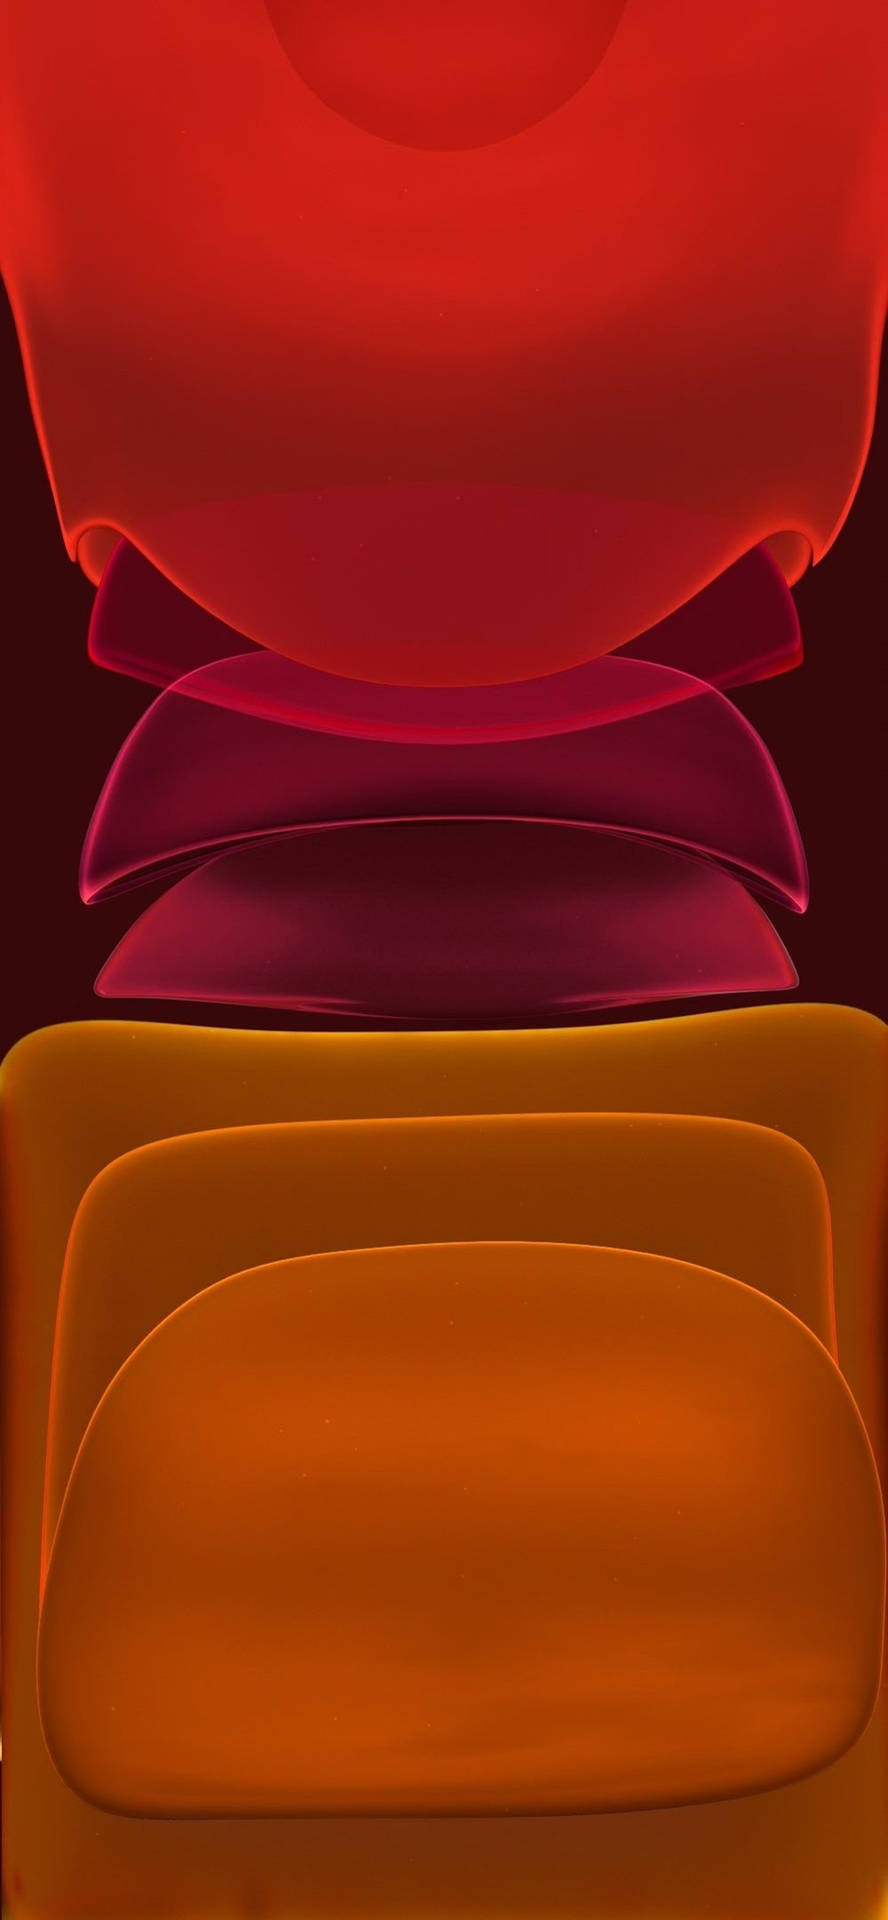 Cool Iphone 11 Orange And Red Blobs Background